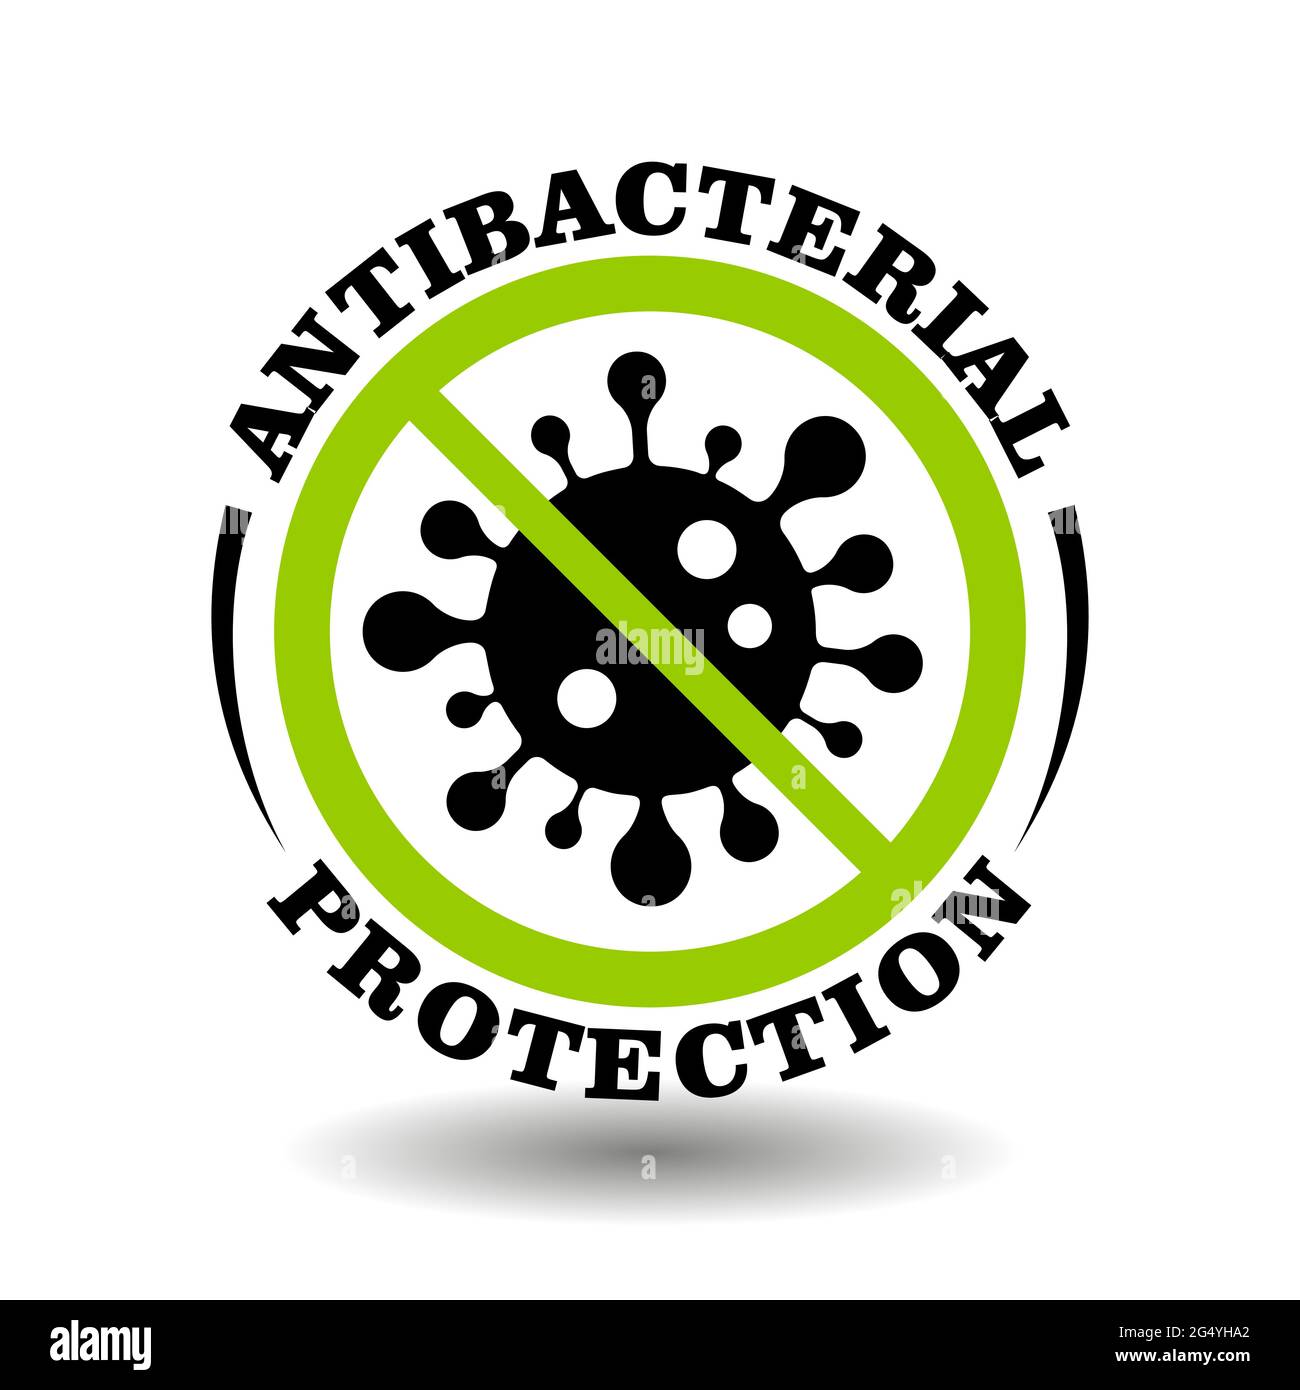 Vector circle stamp Antibacterial Protection with bacteria icon, virus sign, microbe prohibited symbol for medical, chemical, cosmetic products packag Stock Vector